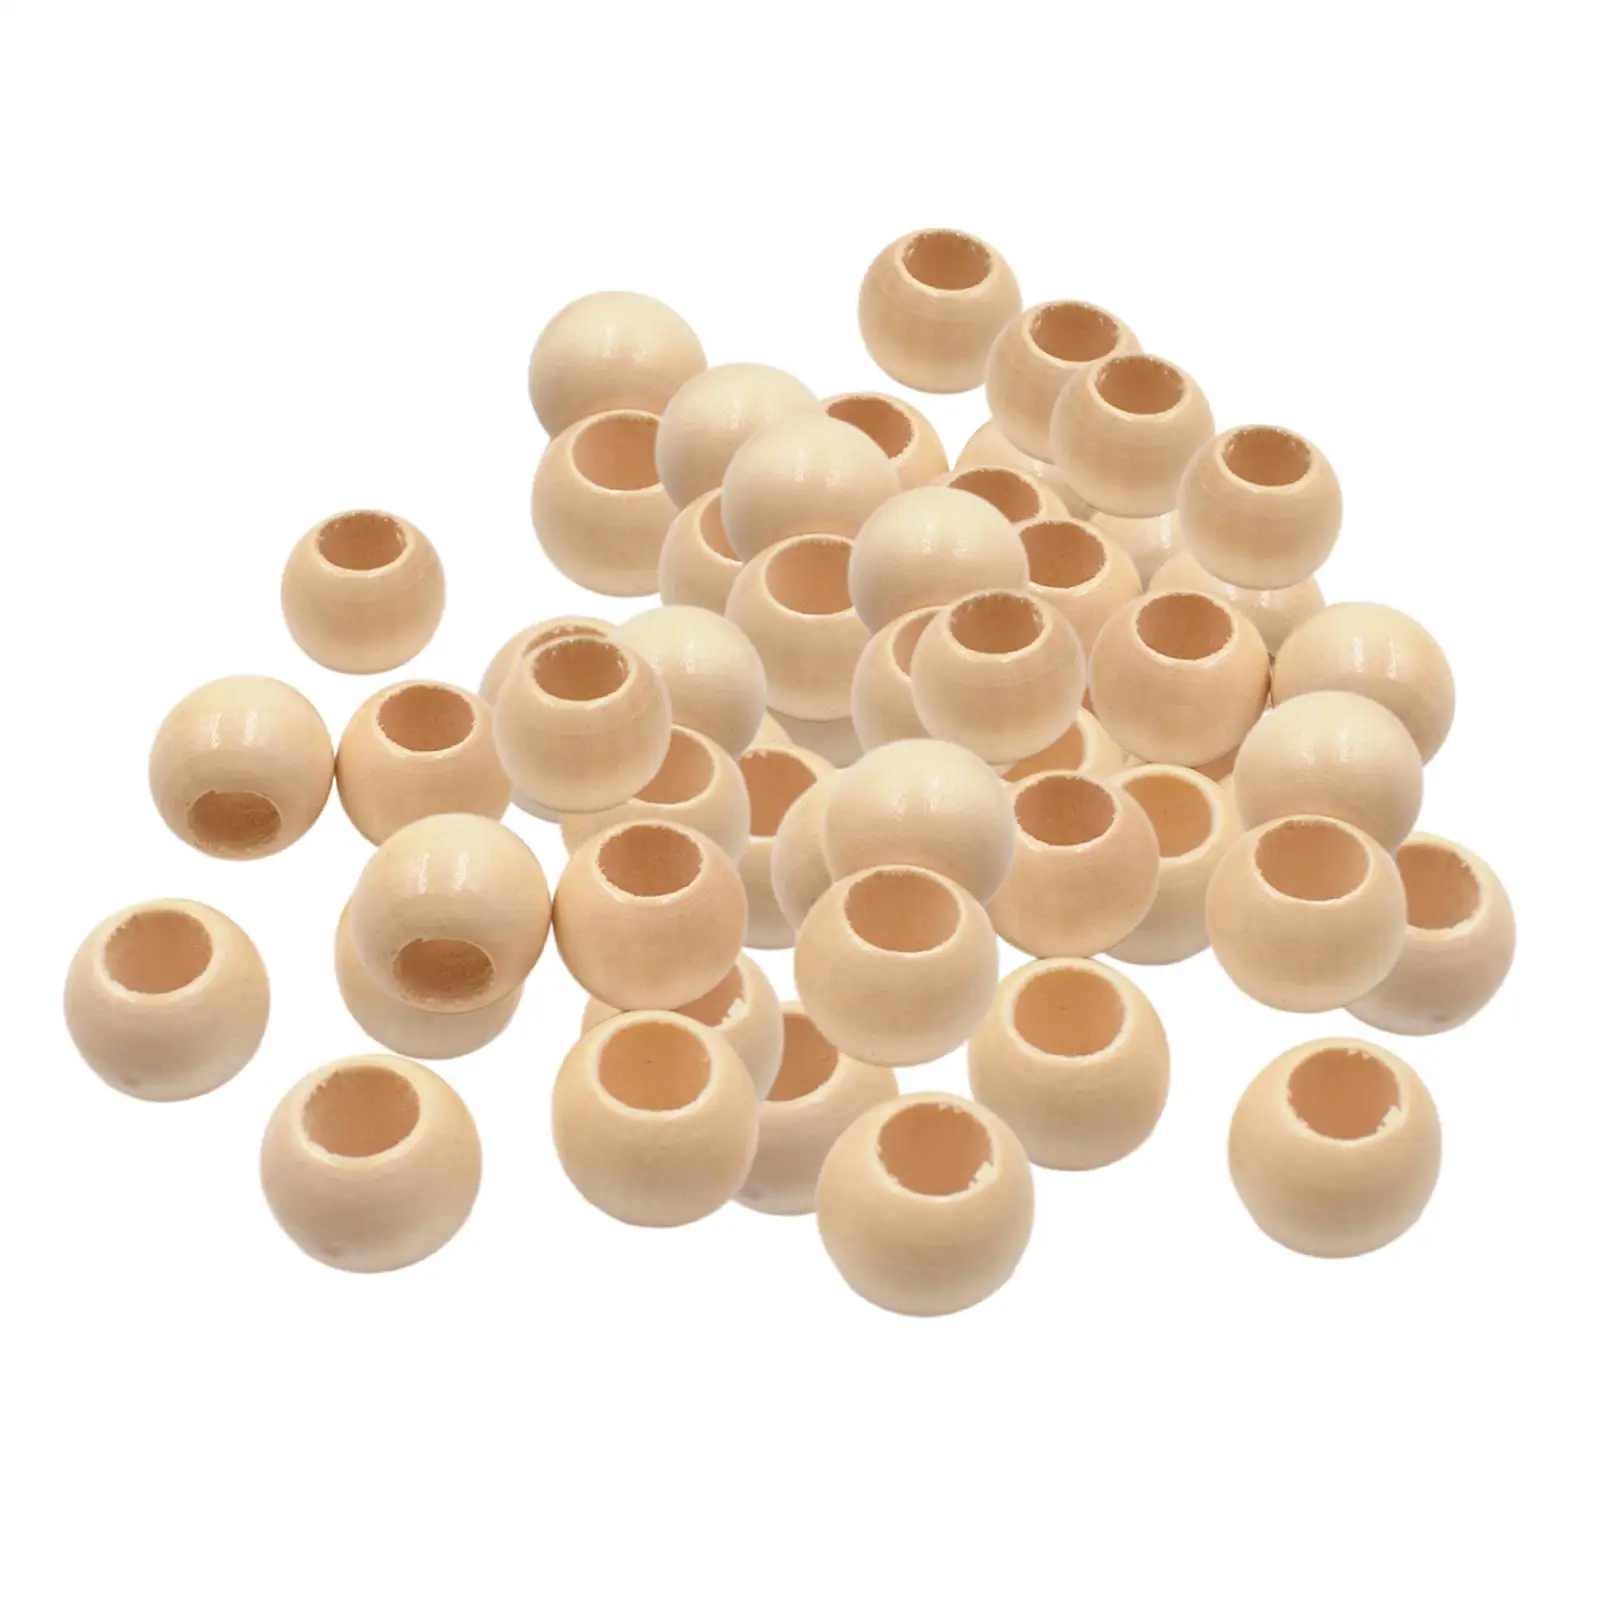 100x Wood Beads Craft Handmade Supplies 2cm Balls Round Beads Loose Beads for Jewelry Making Pendants Party Farmhouse Decoration